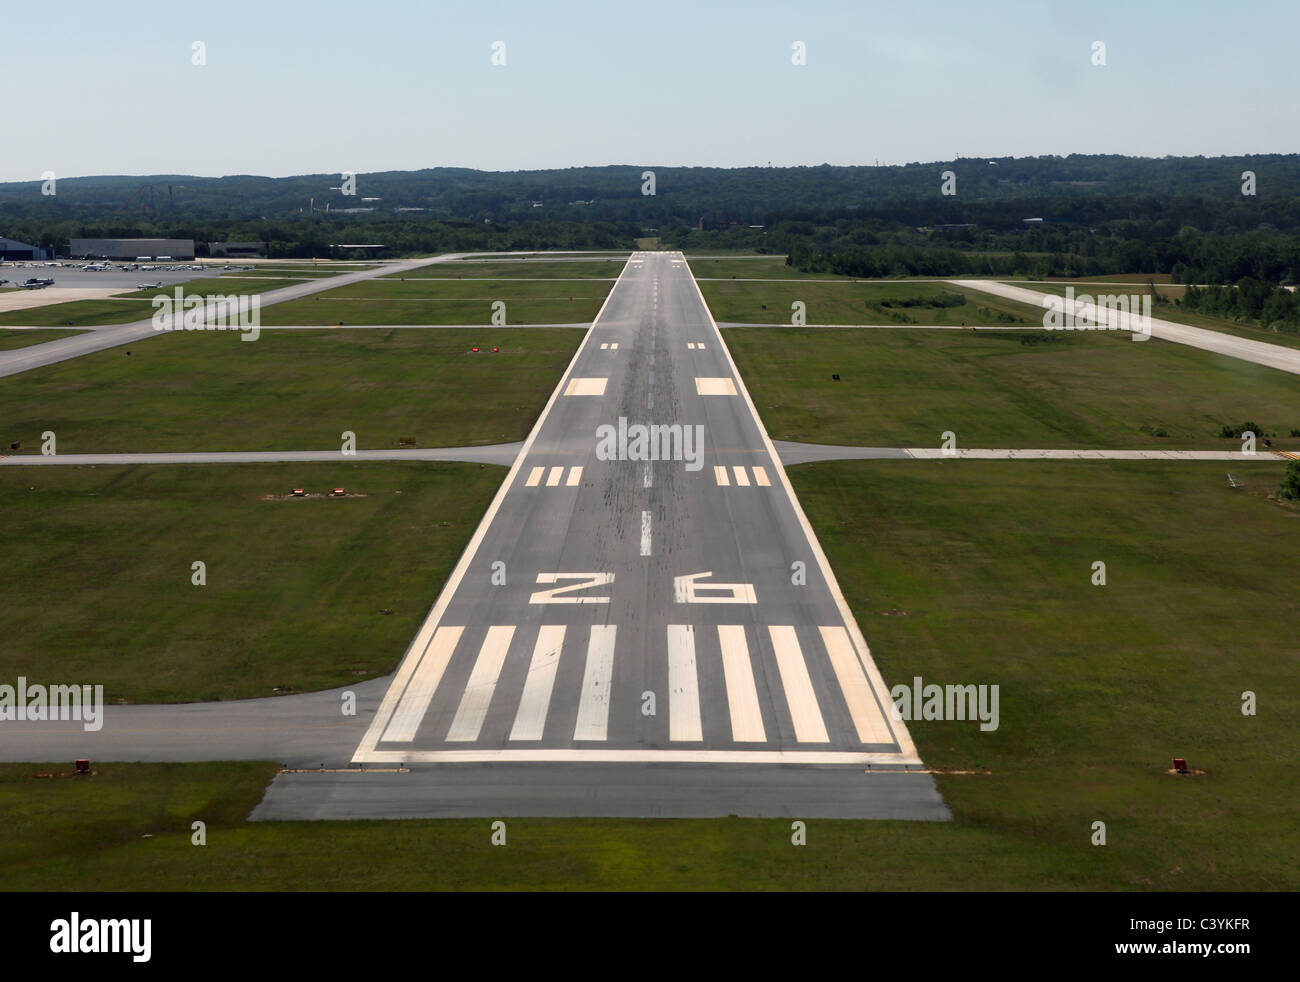 runway-approach-at-a-rural-airport-in-the-eastern-united-states-C3YKFR.jpg